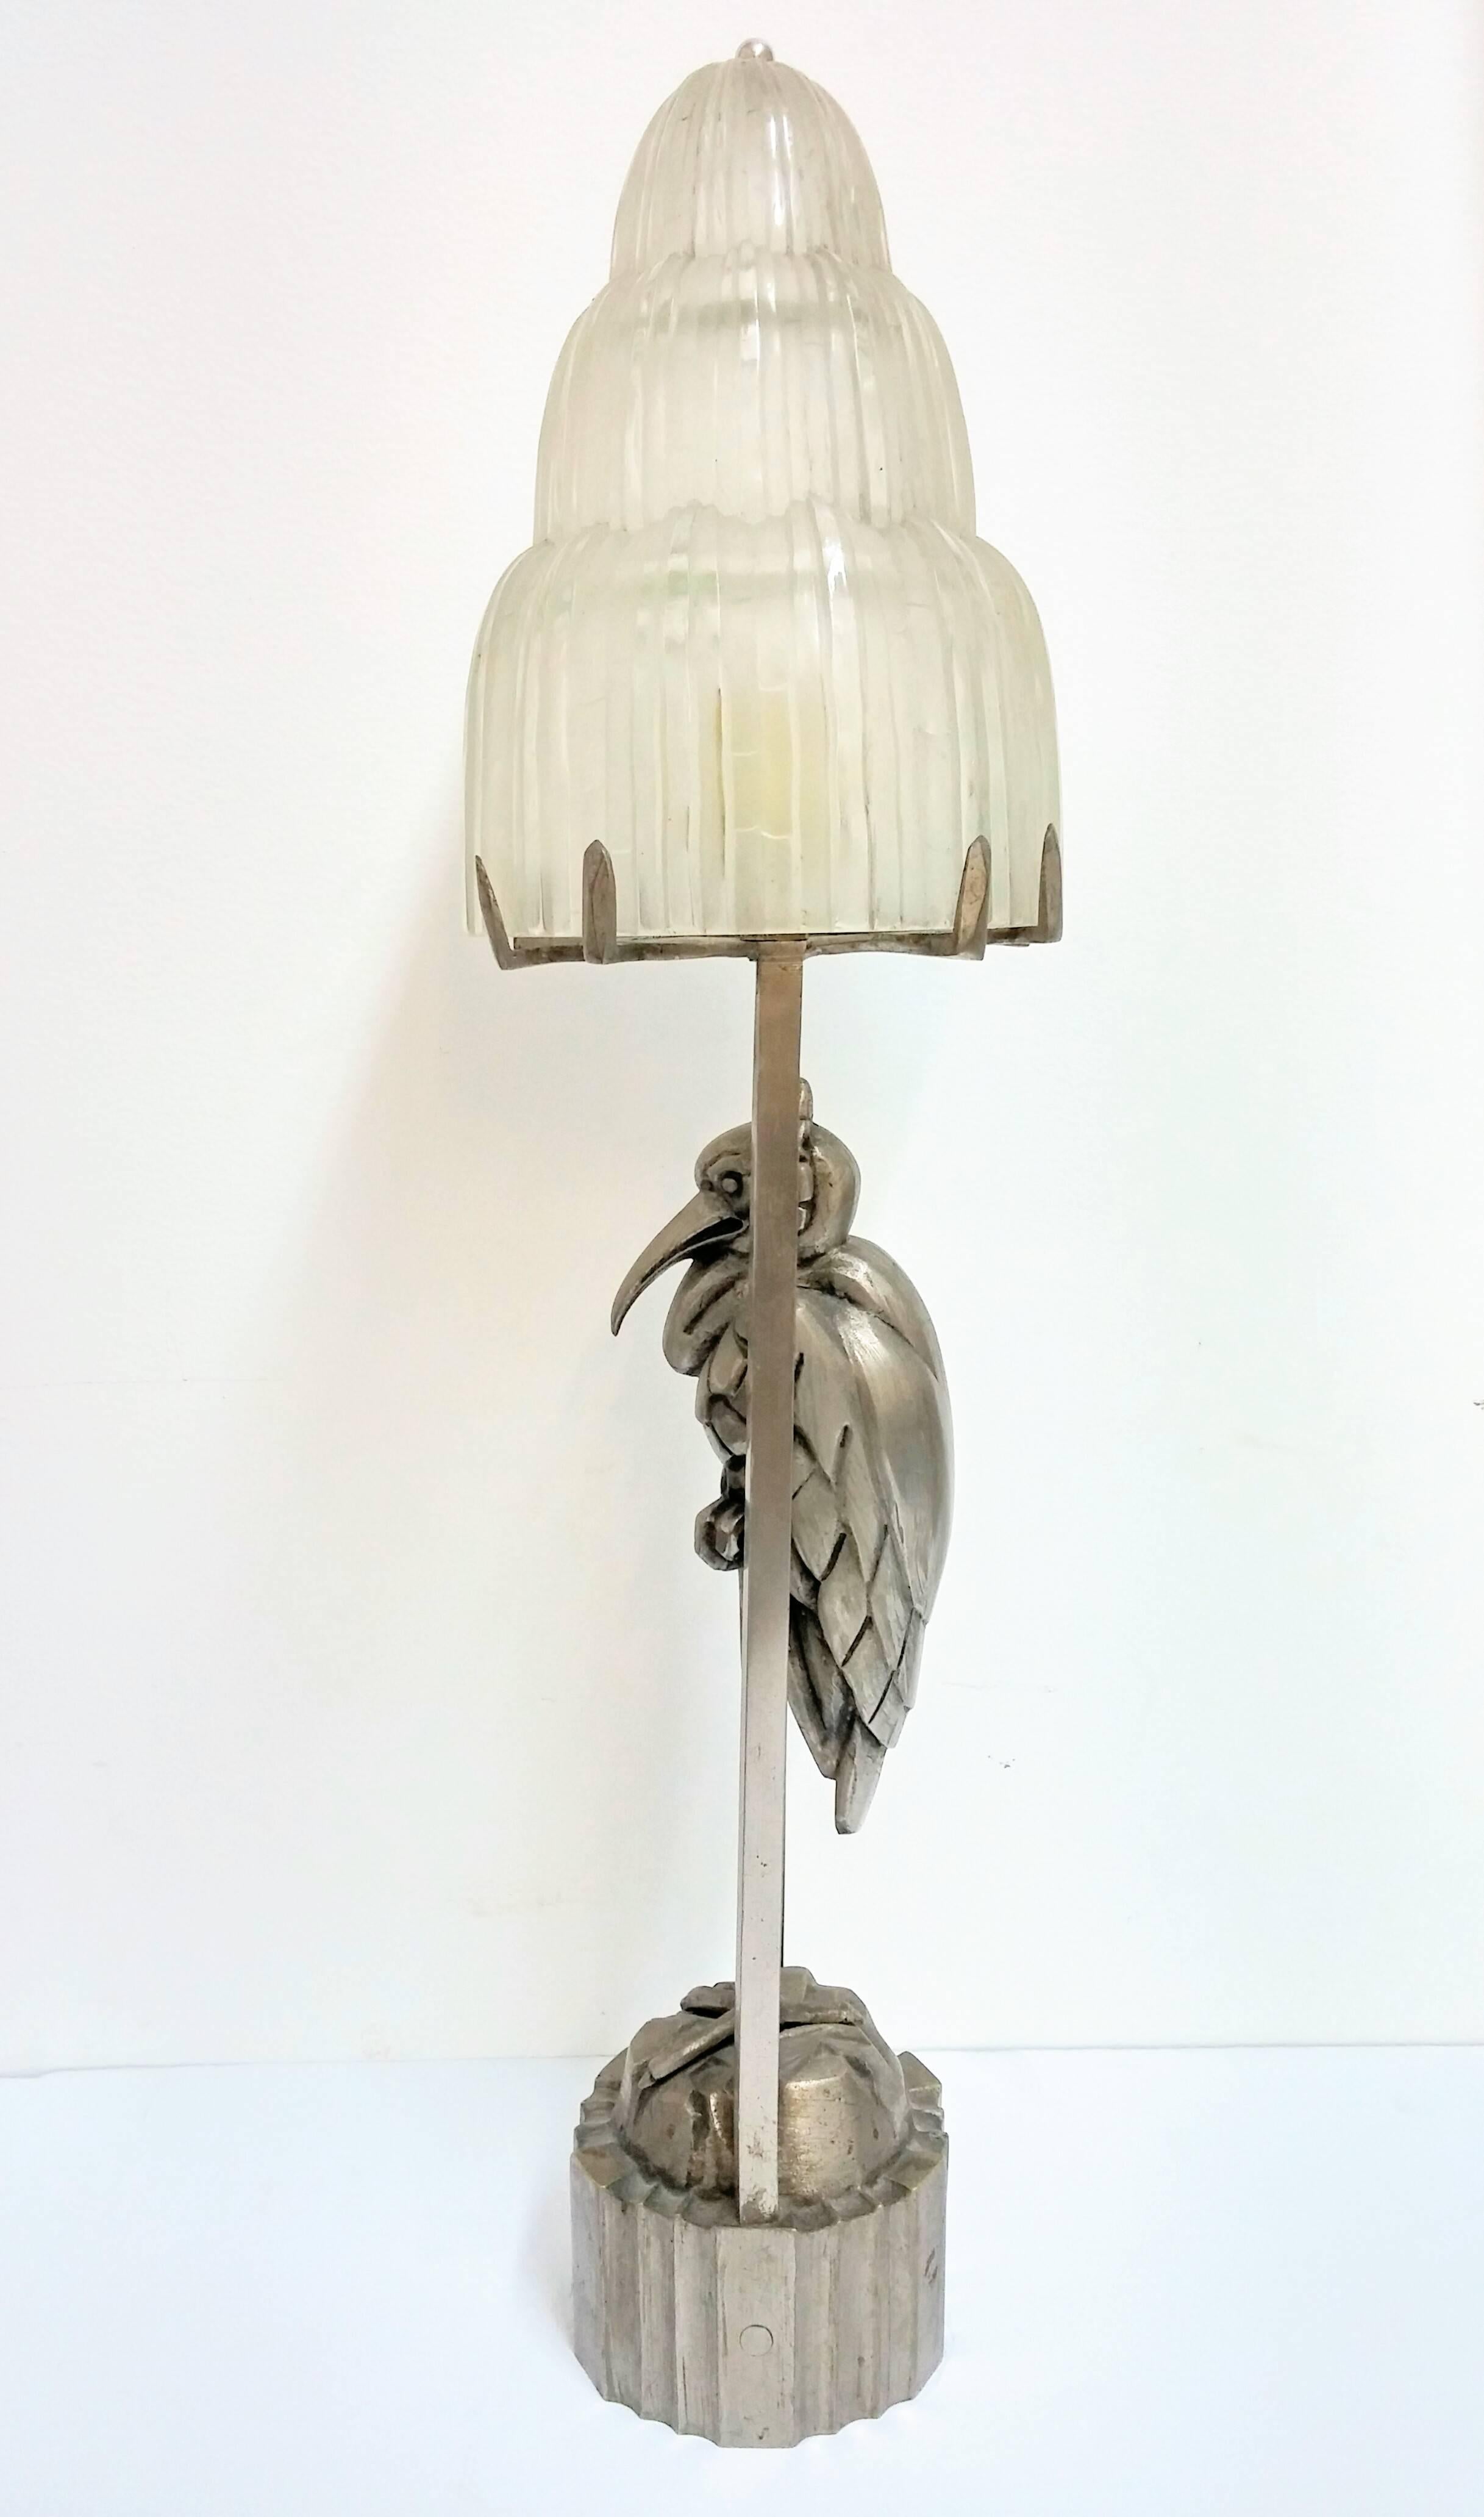 This table lamp was created by French artist 